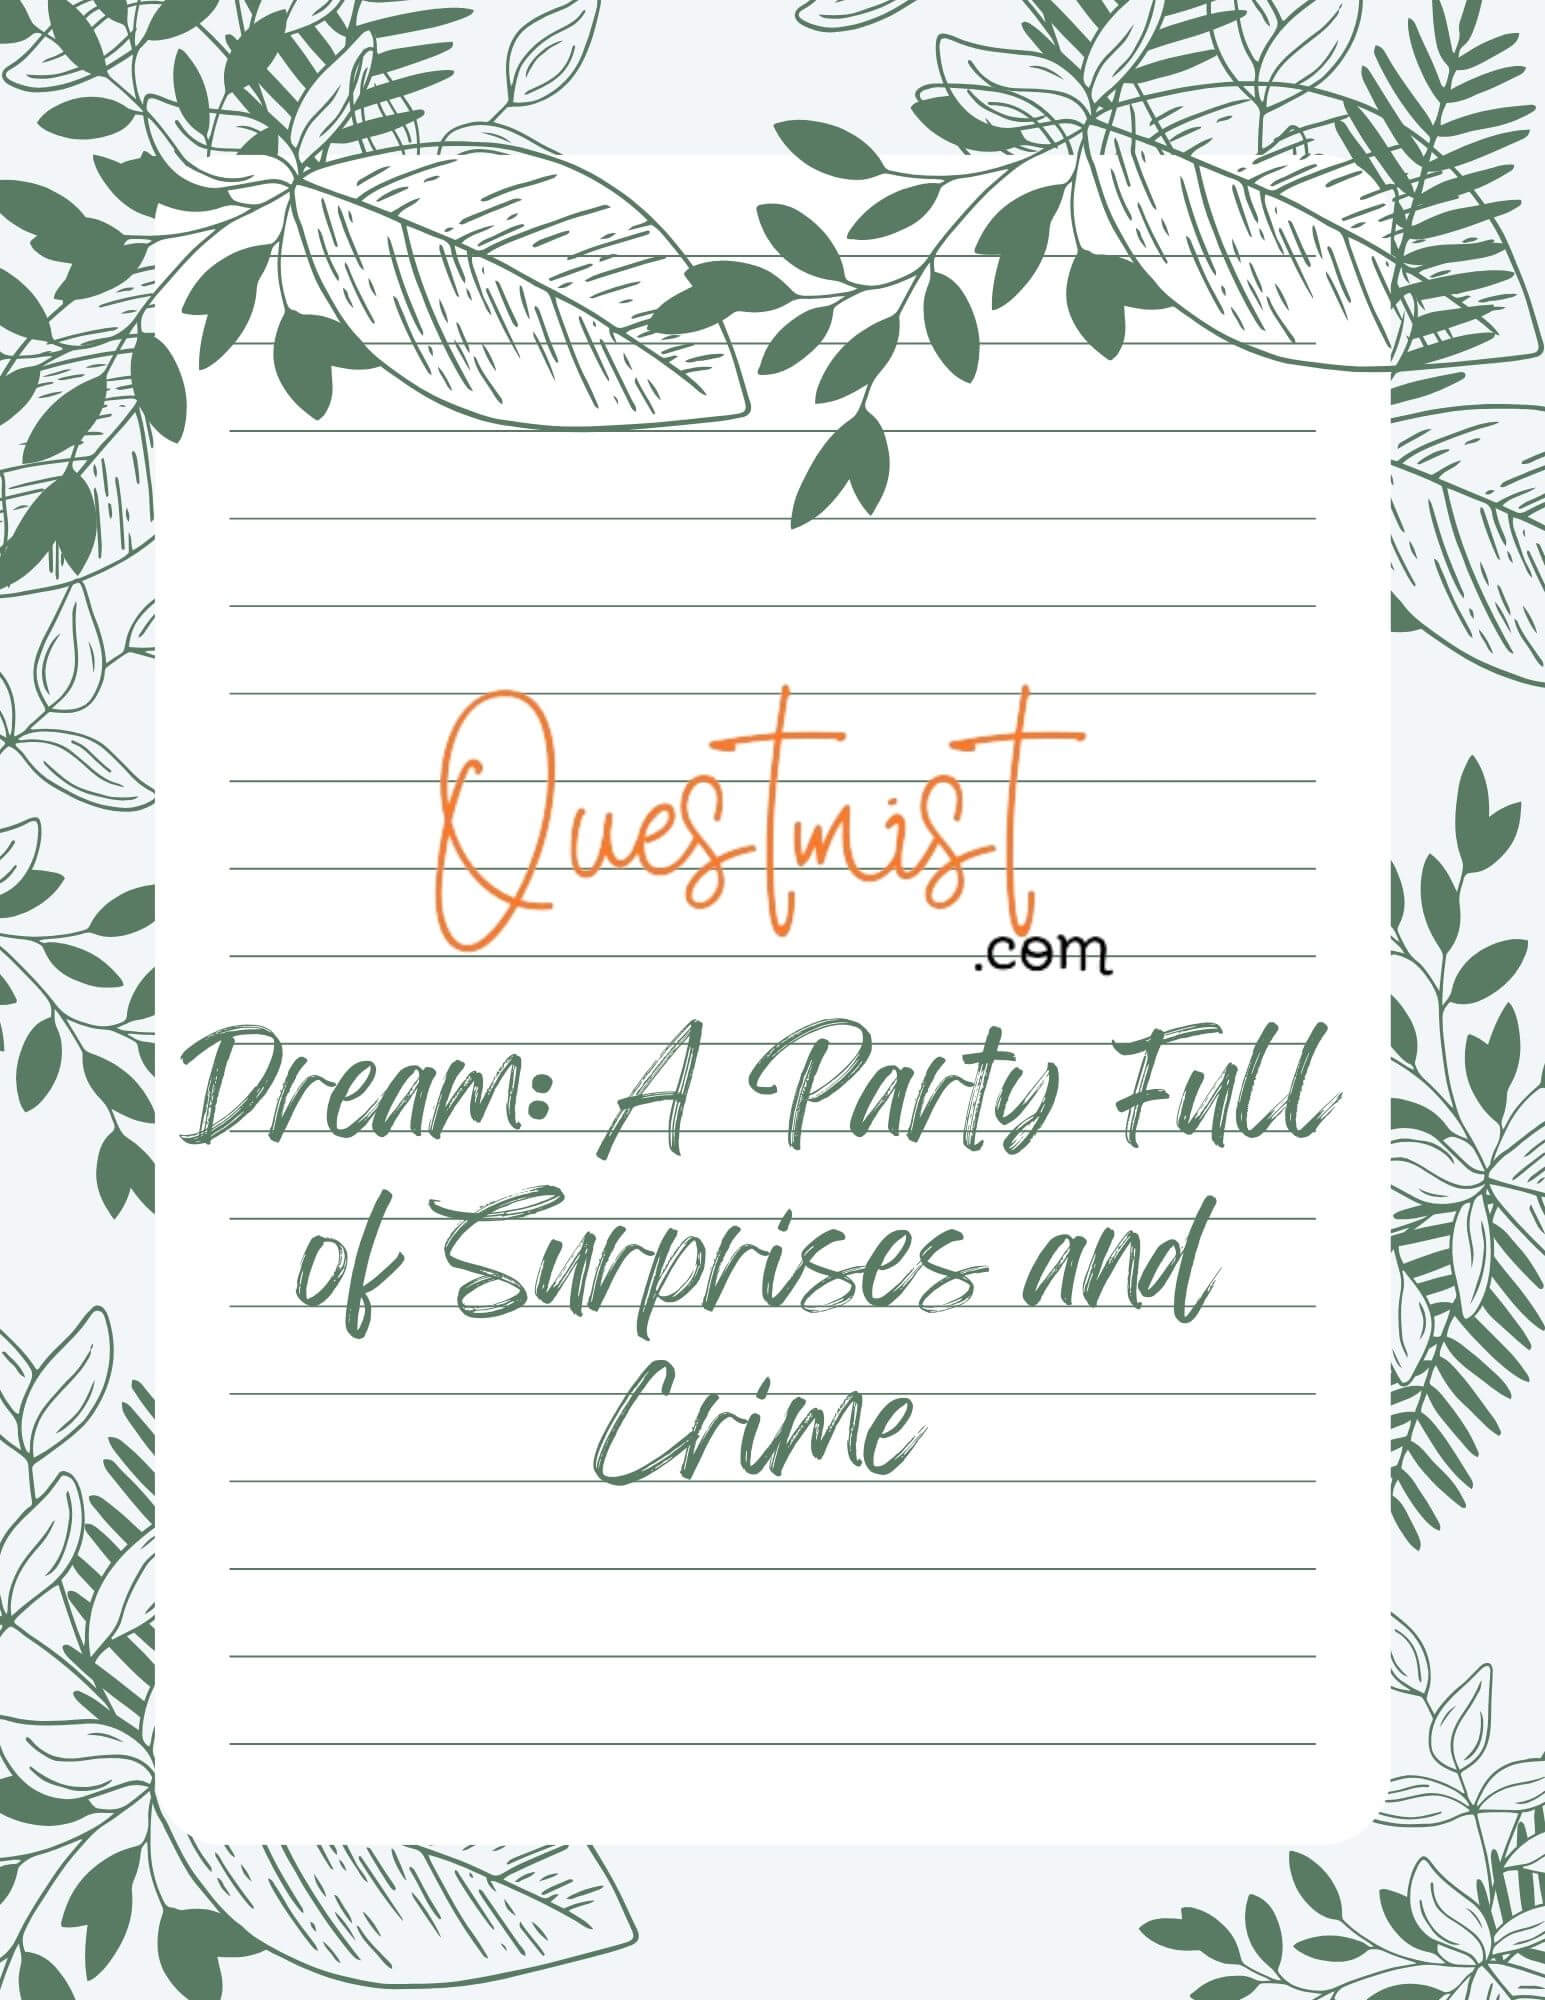 Dream Journal : A Party Full of Surprises and Crime